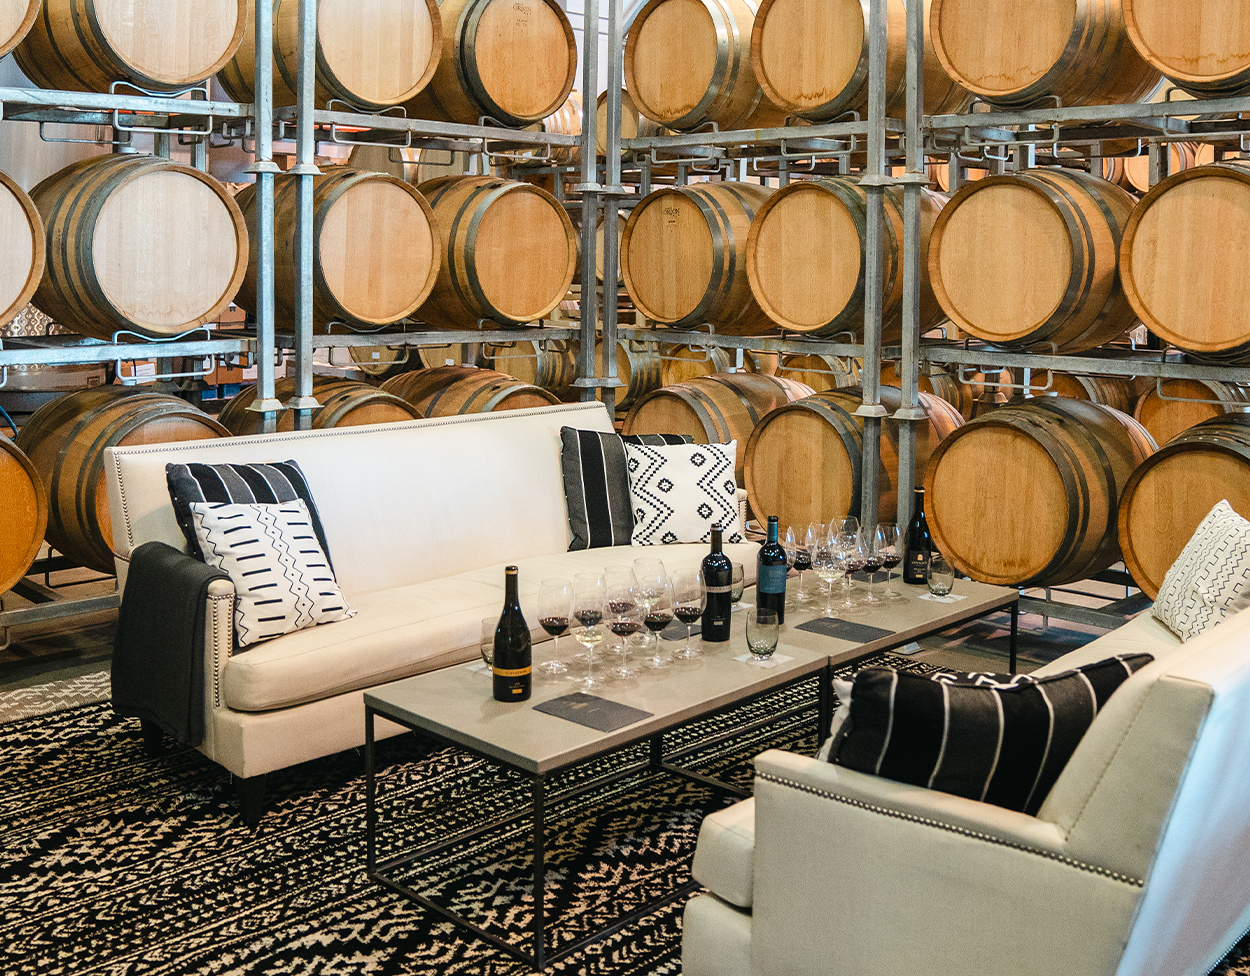 Indoor wine tasting with a table and wine glasses surrounded by wine barrels